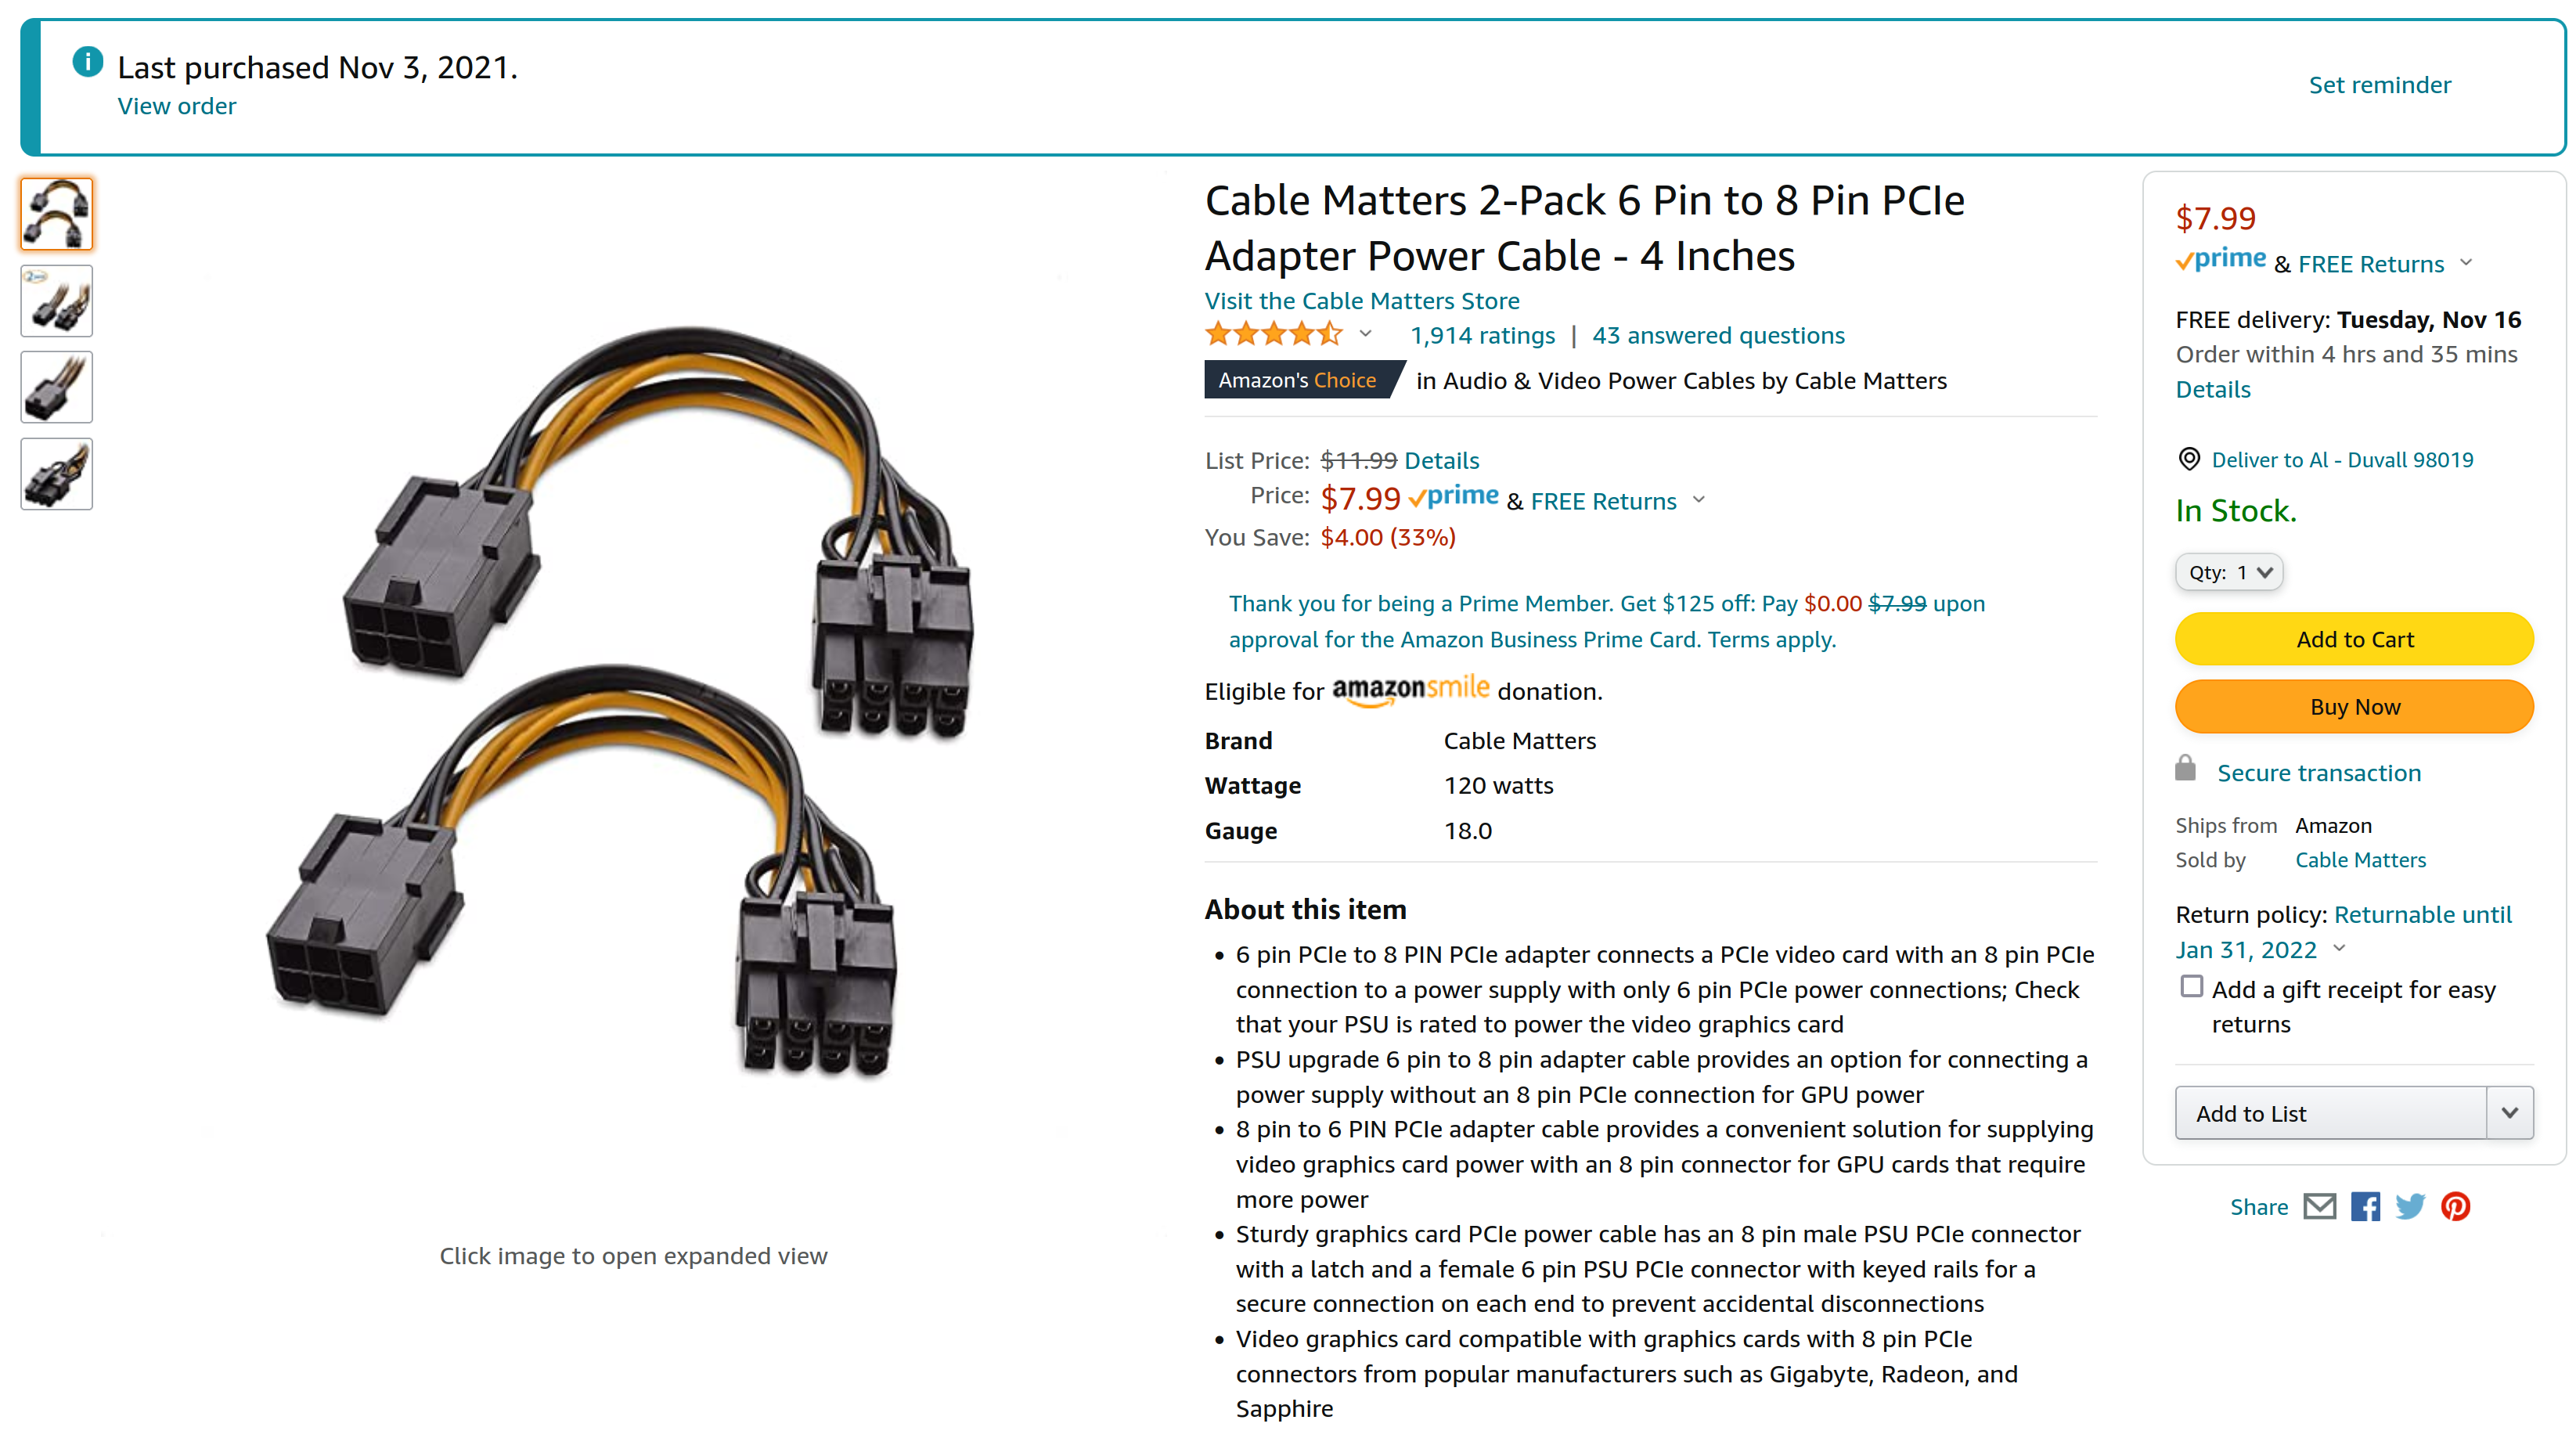 Cable Matters 104042x2 PCIe 6-pin to 8-pin adapter.